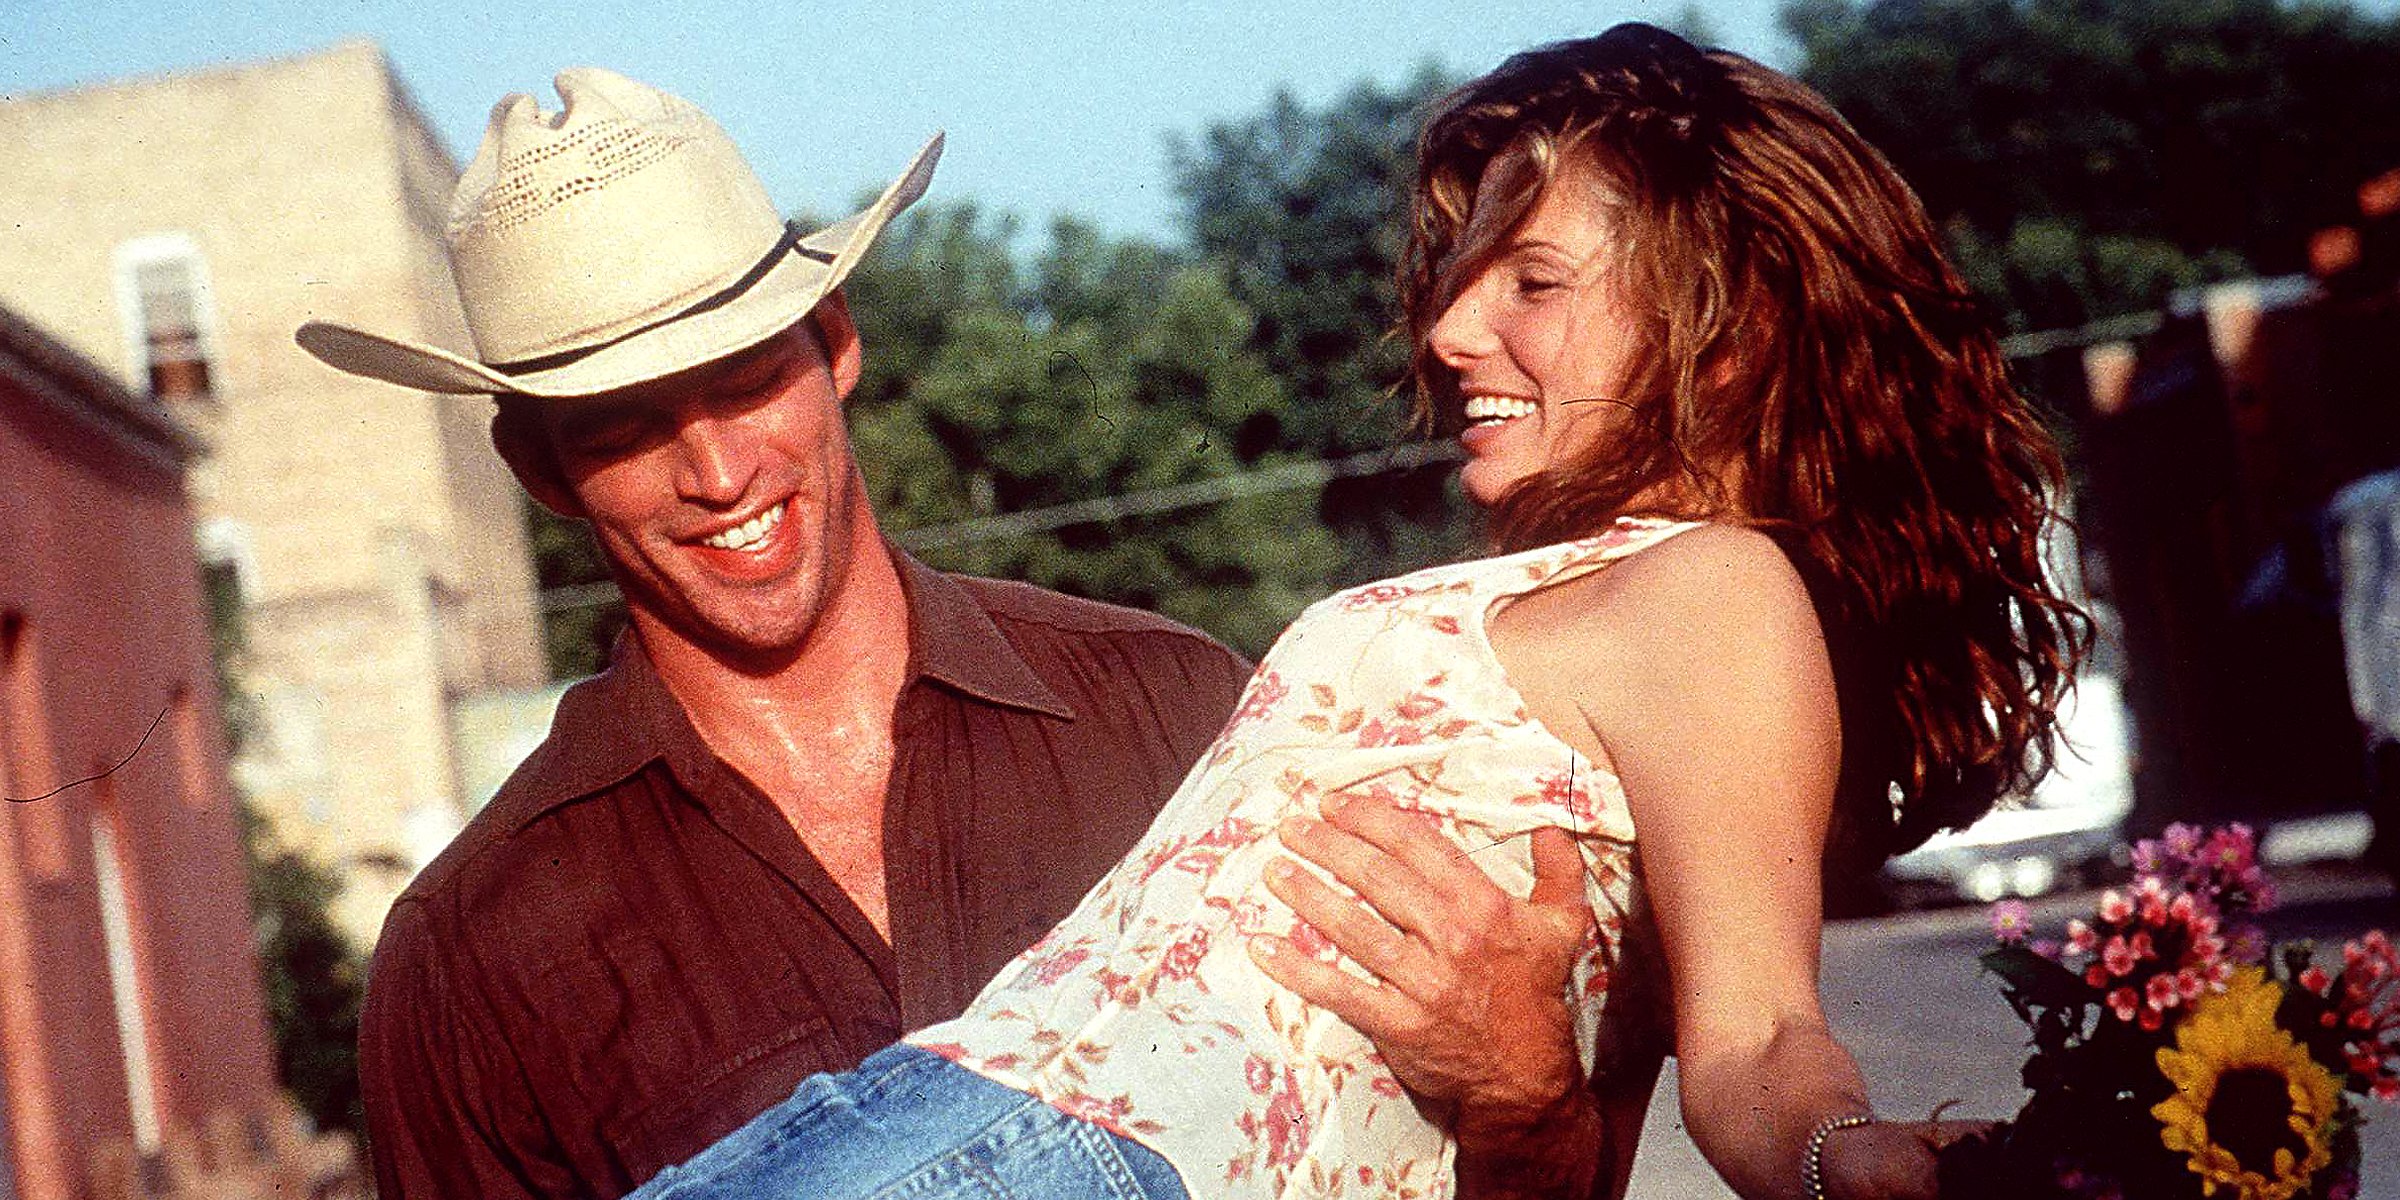 Characters Birdee Pruitt and Justin Matisse in the film 'Hope Floats'  | Source: Getty Images